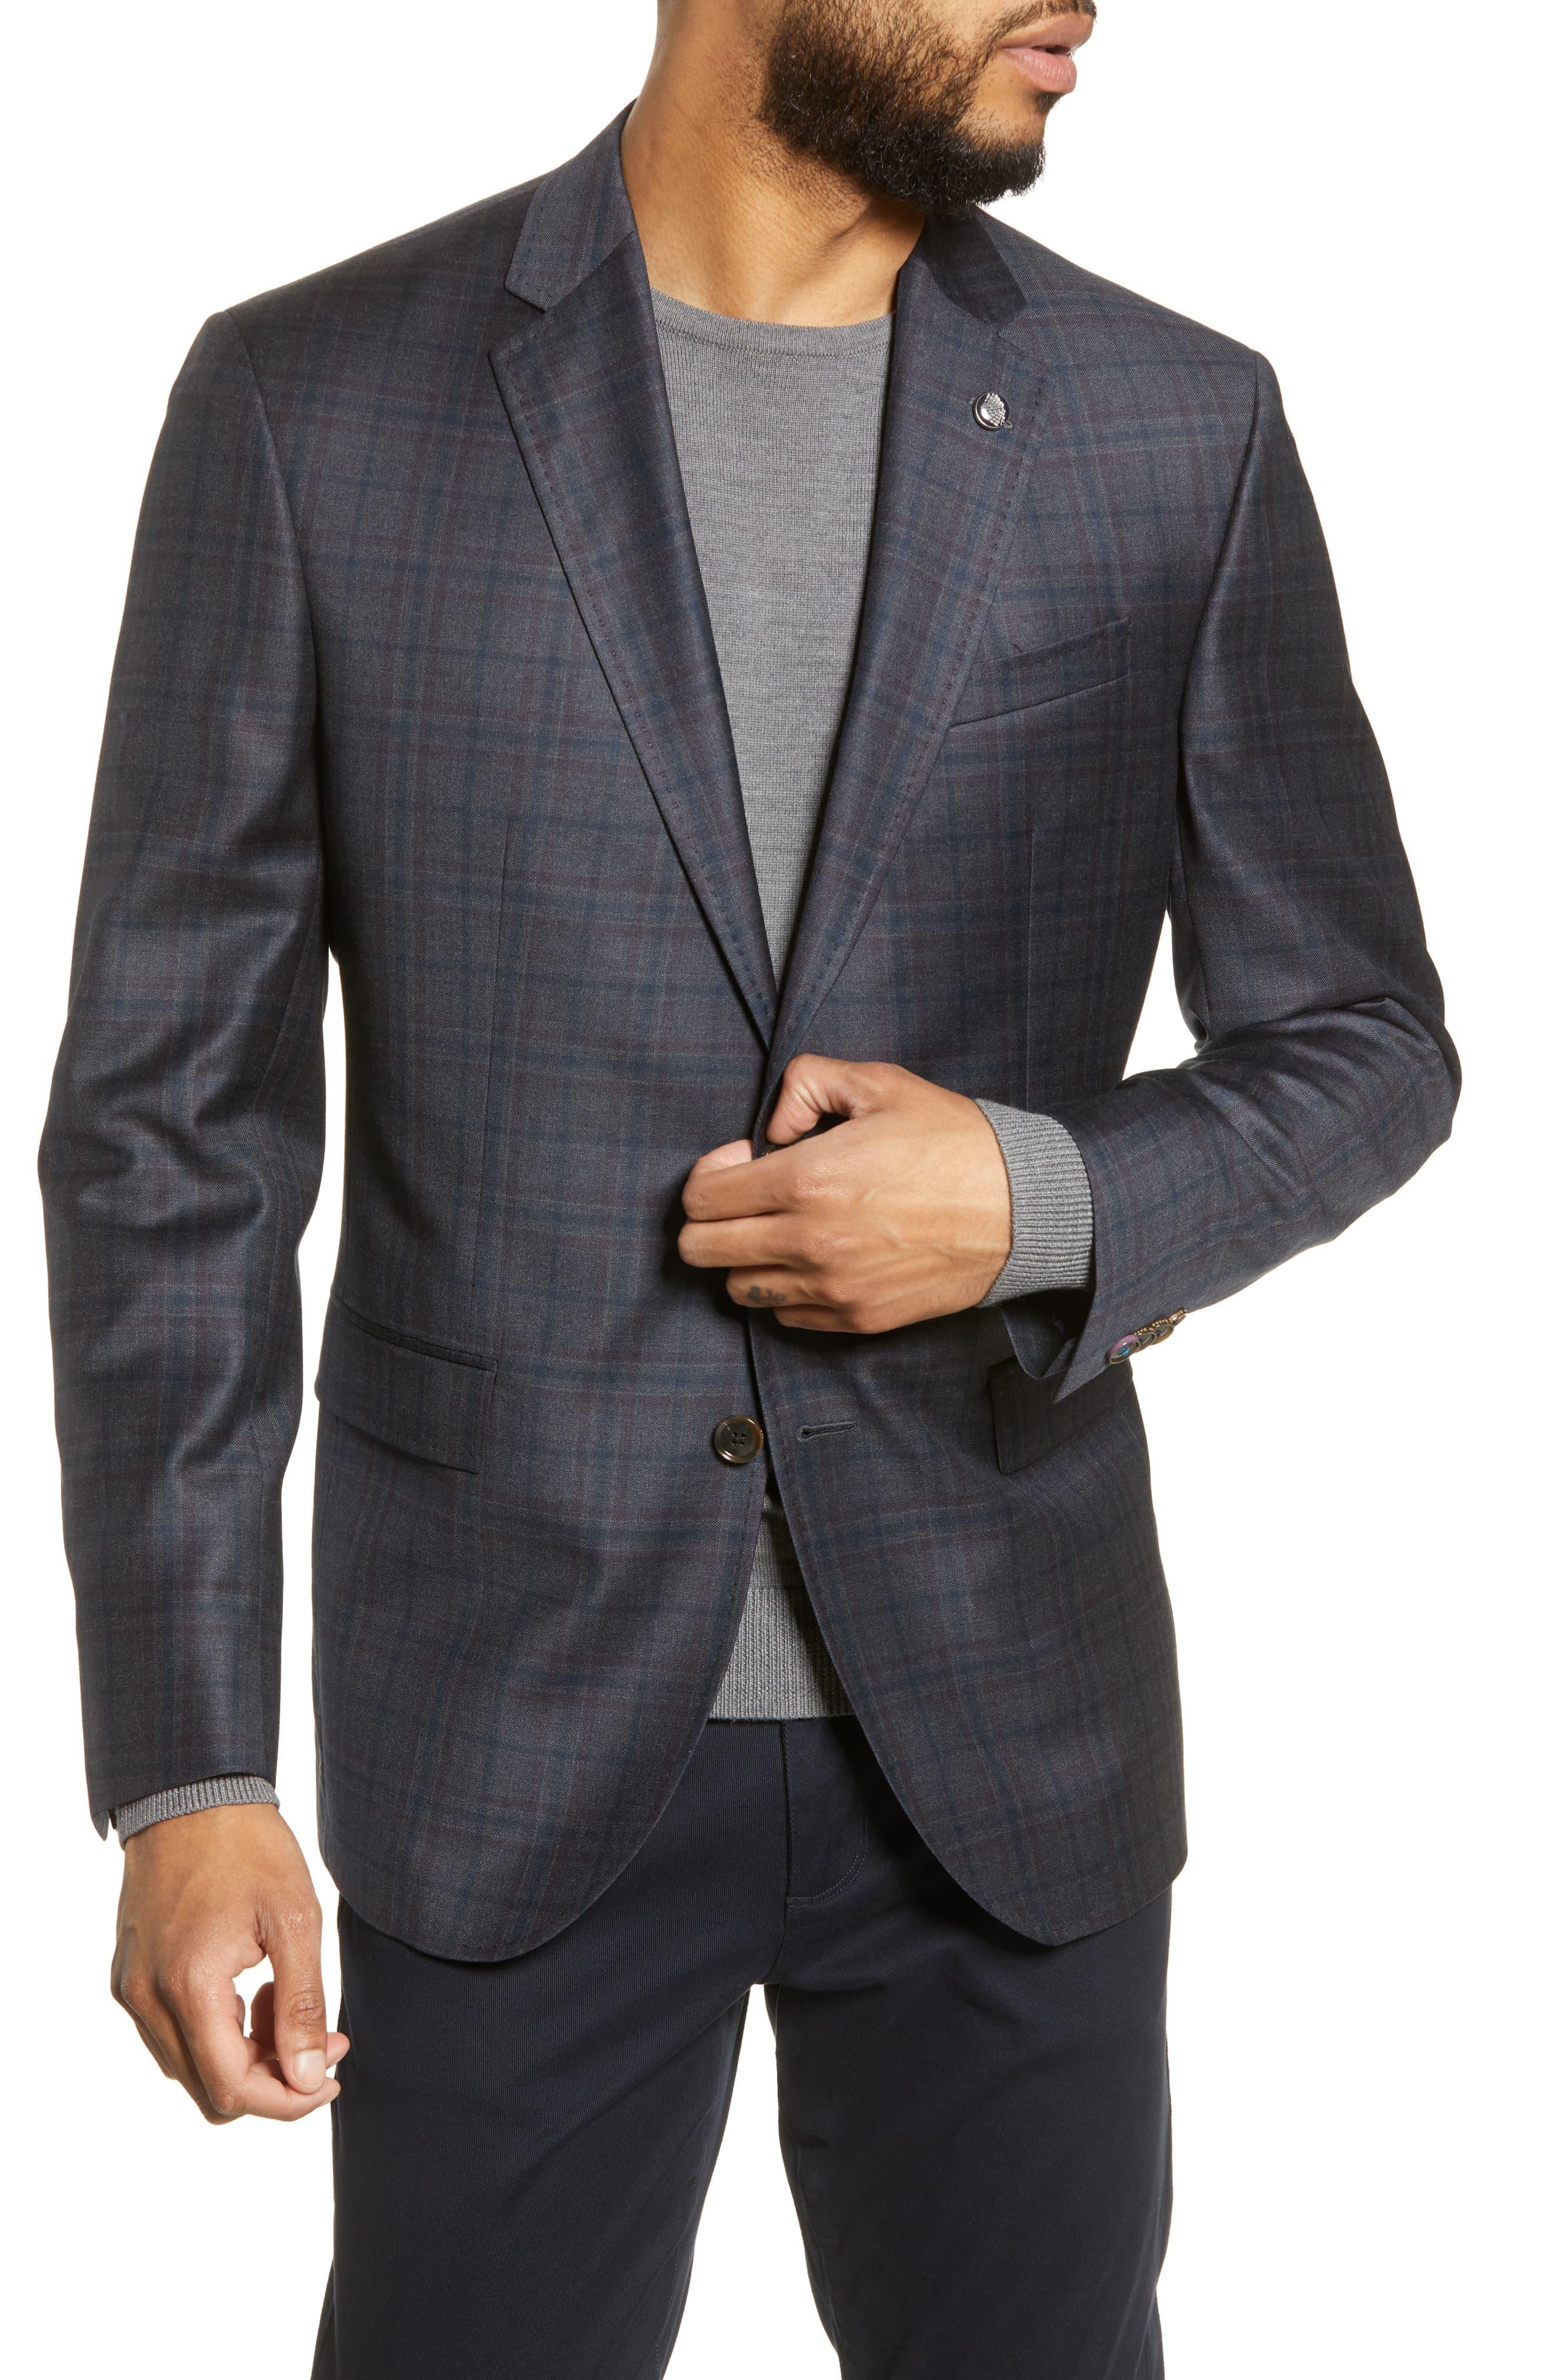 Ted Baker Jay Trim Fit Plaid Wool Sport Coat in Grey (Gray) for Men - Lyst